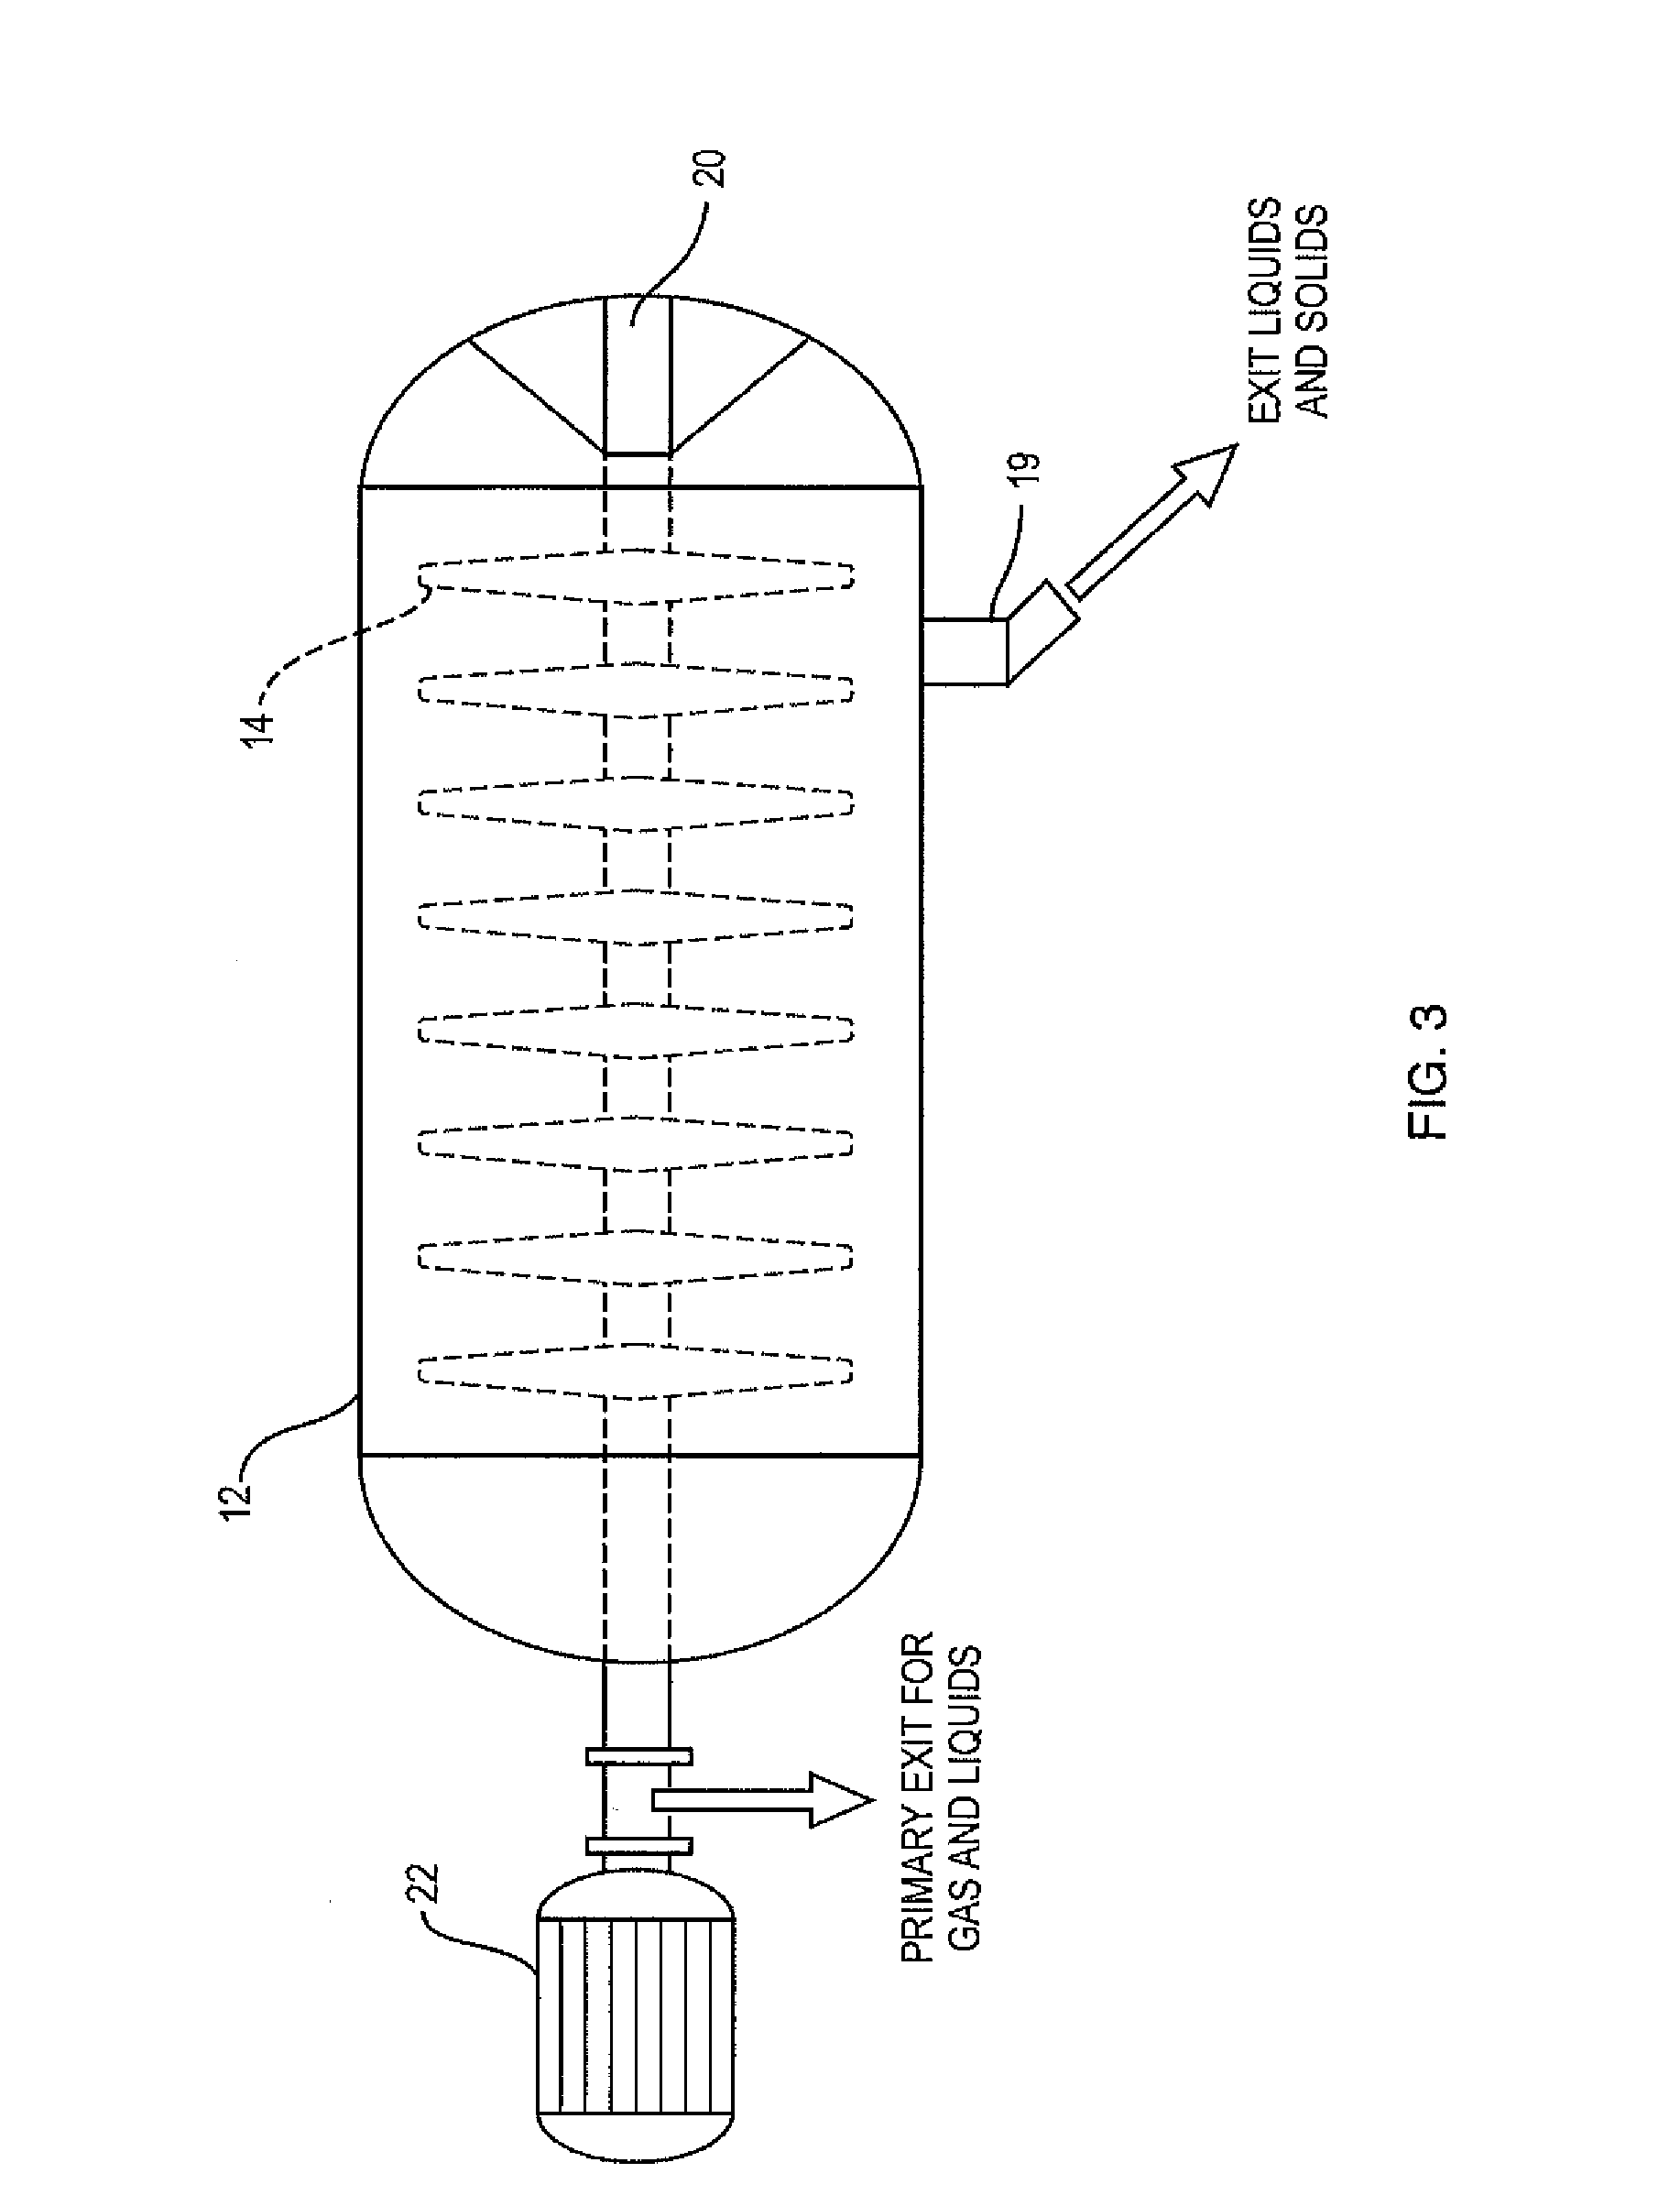 System and method for producing biomaterials